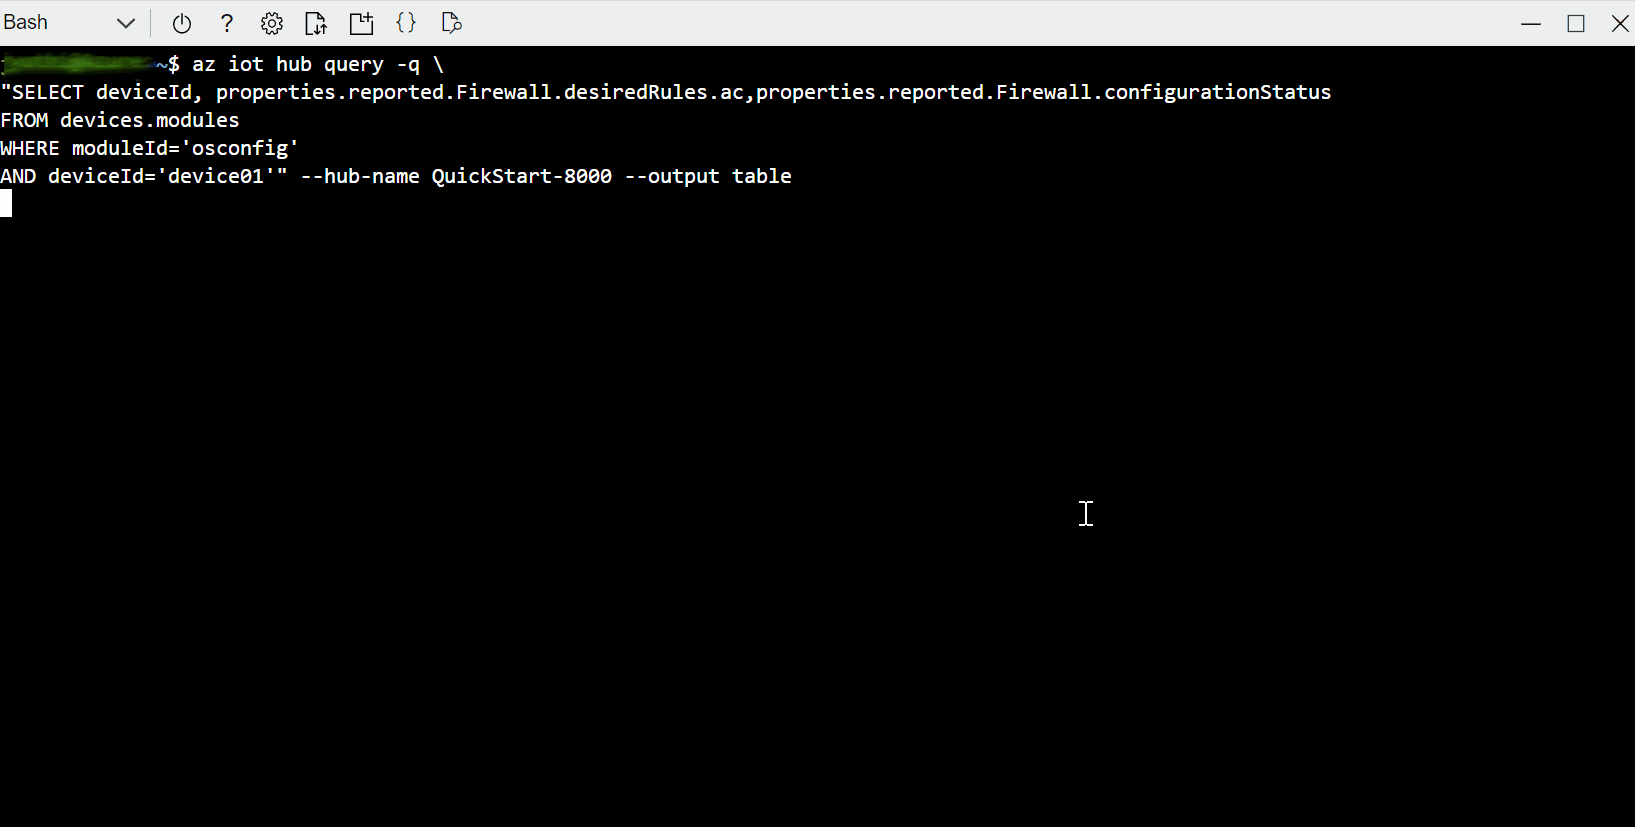 Screen capture showing how to verify after creating a firewall rule for a single device using bash